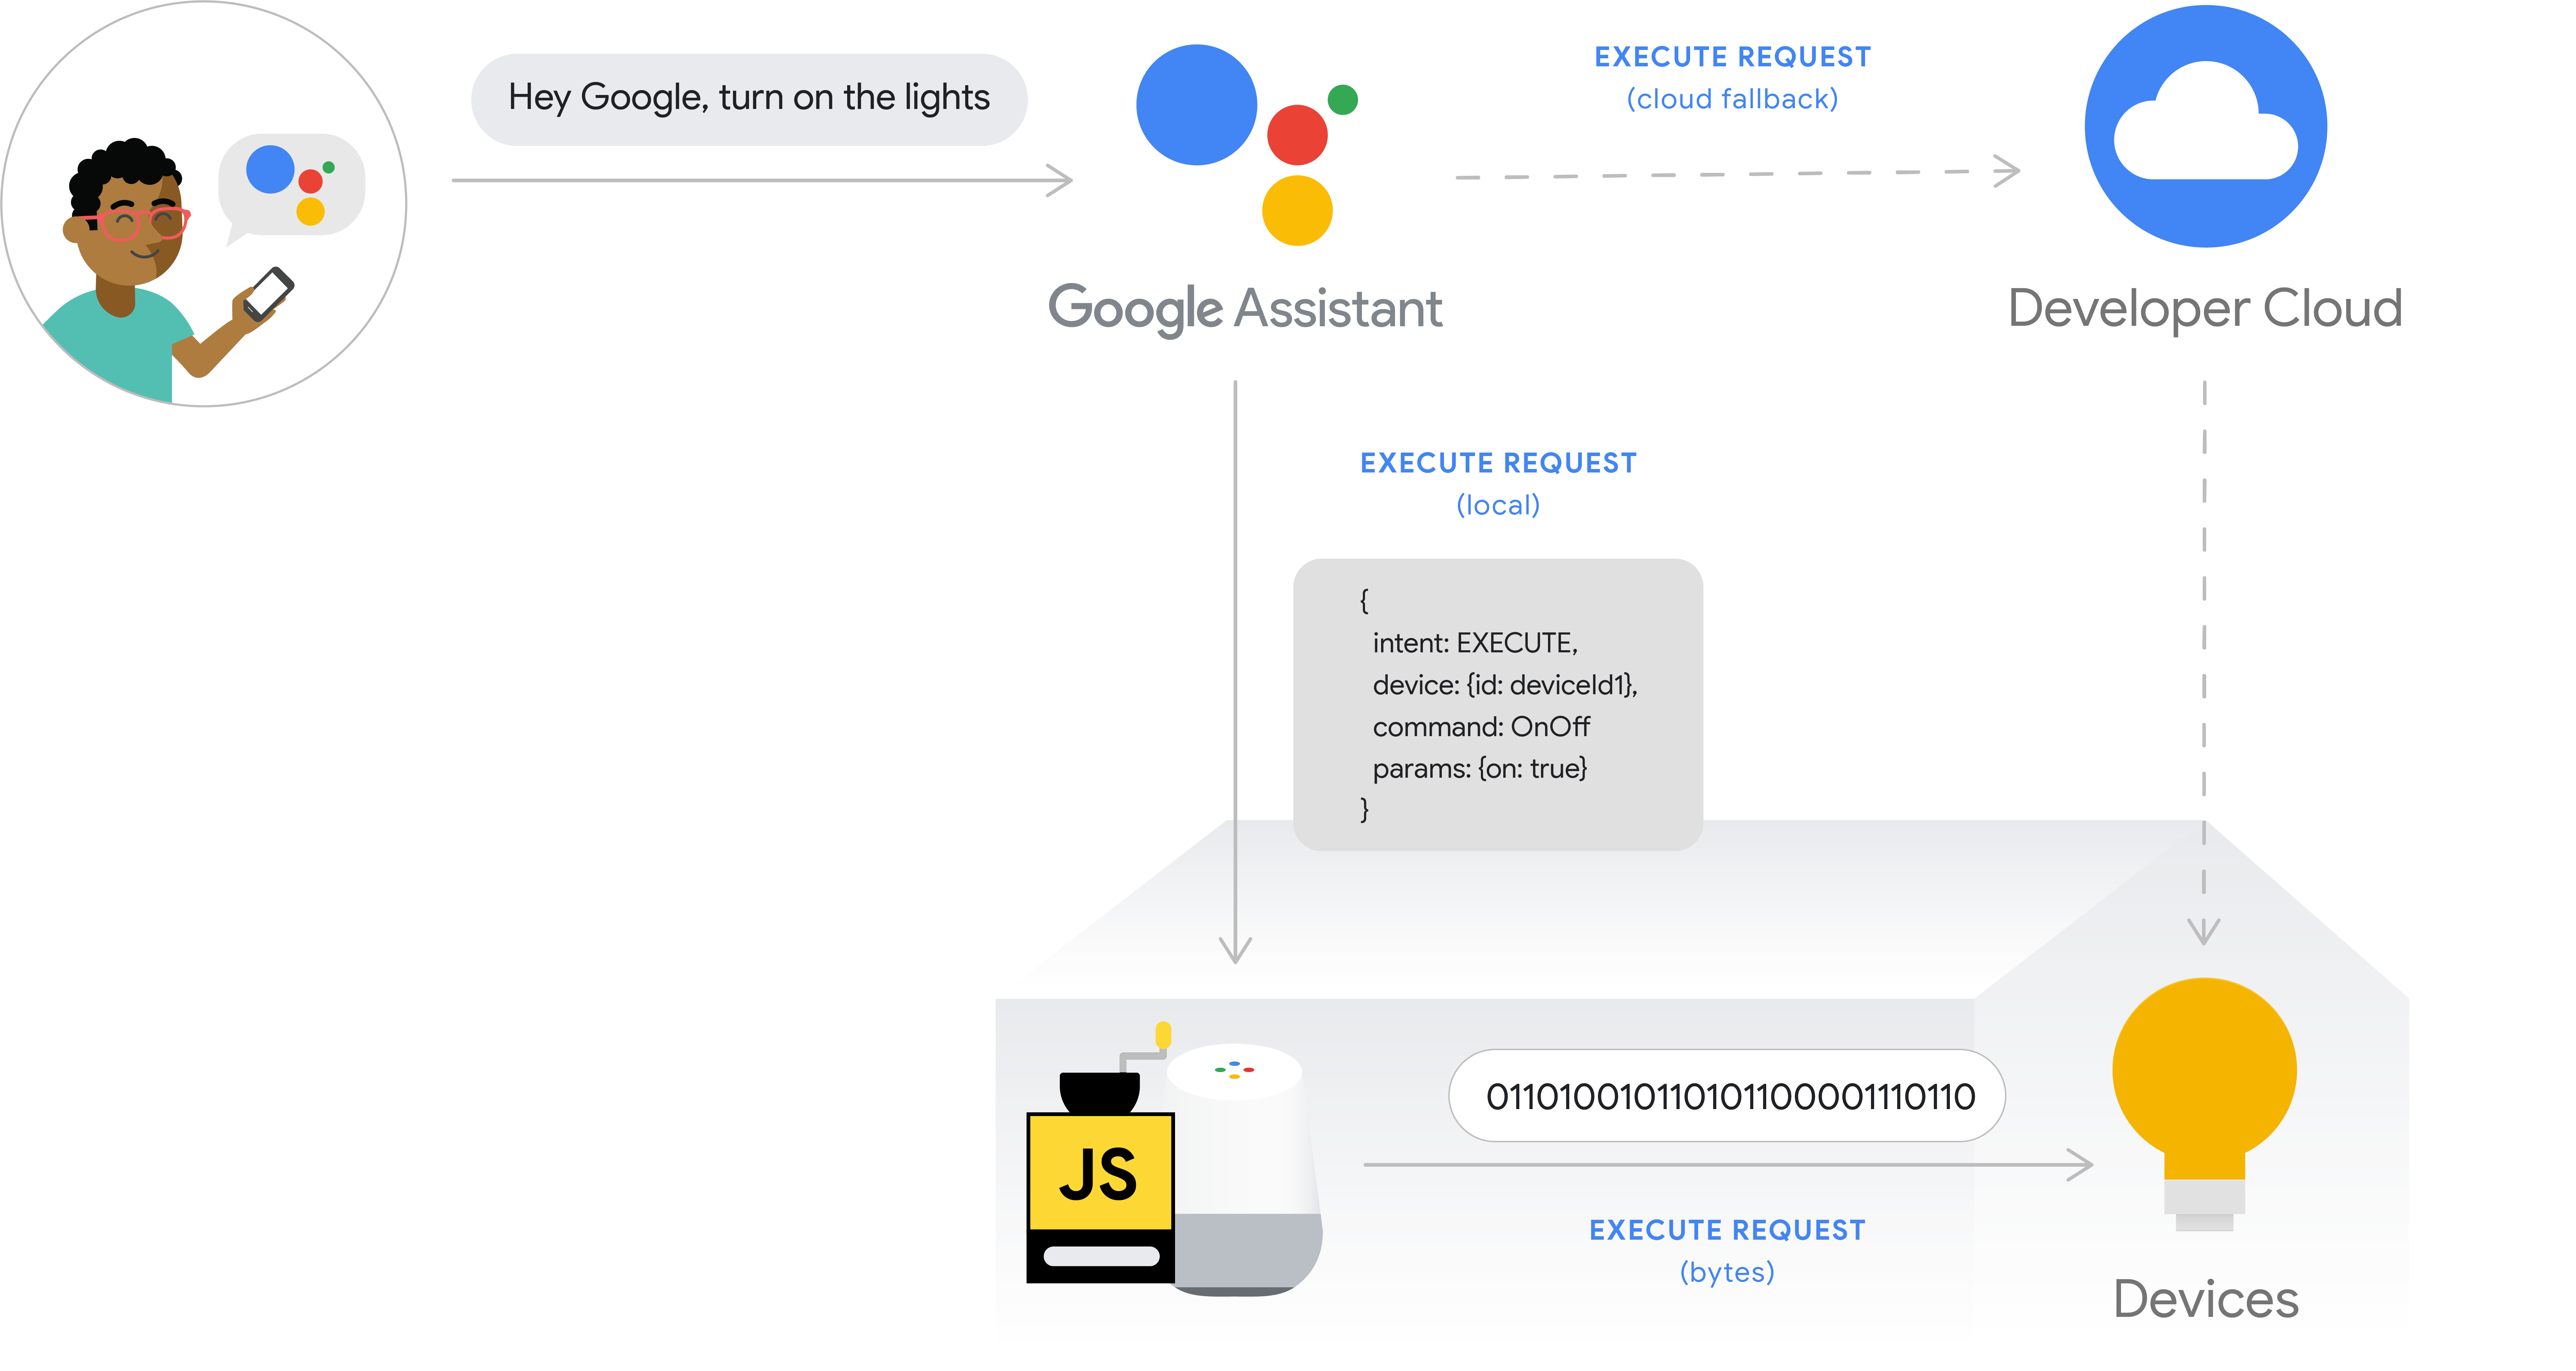 This figure shows the execution flow for local fulfillment. The
            execution path captures a user's intent from a phone with
            Google Assistant, then the user intent is processed by
            the Google Cloud, then it is executed locally on the Google Home
            device and the command is issued directly to the device hub or
            directly to the device. The developer cloud is available as a
            cloud fallback.